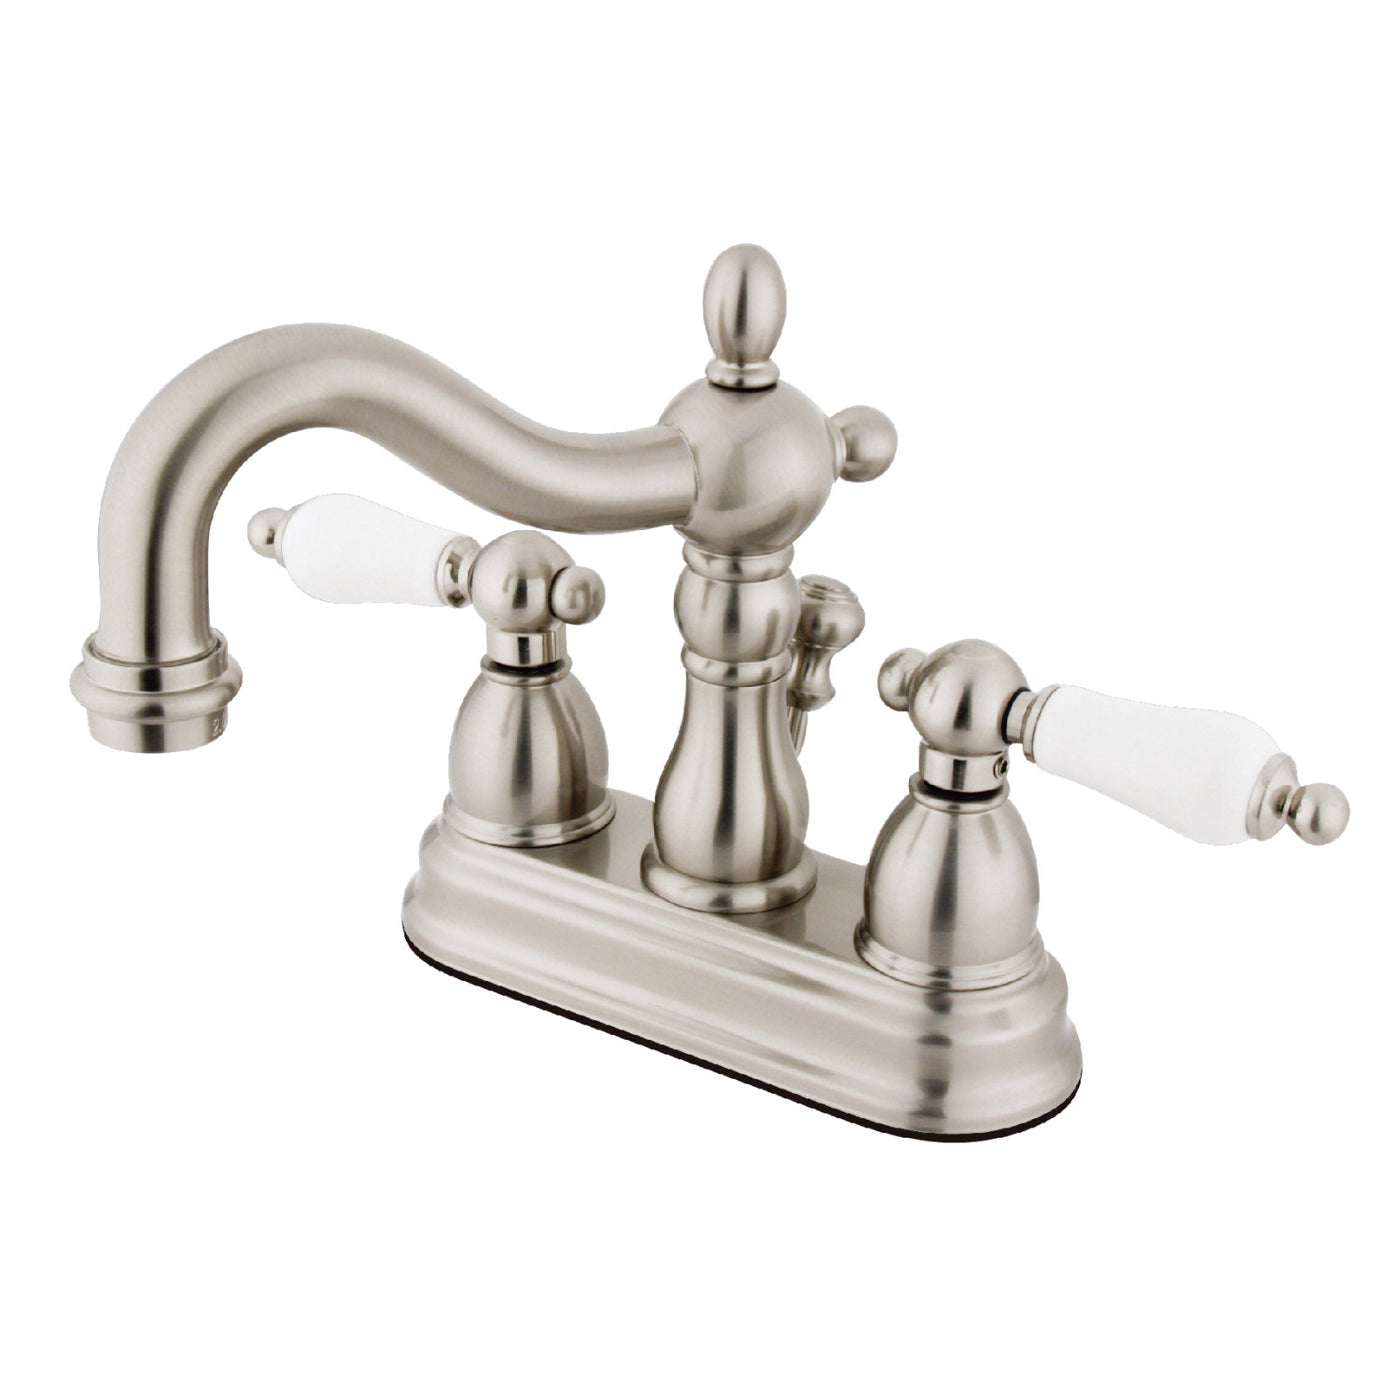 Elements of Design EB1608PL 4-Inch Centerset Bathroom Faucet with Plastic Pop-Up, Brushed Nickel